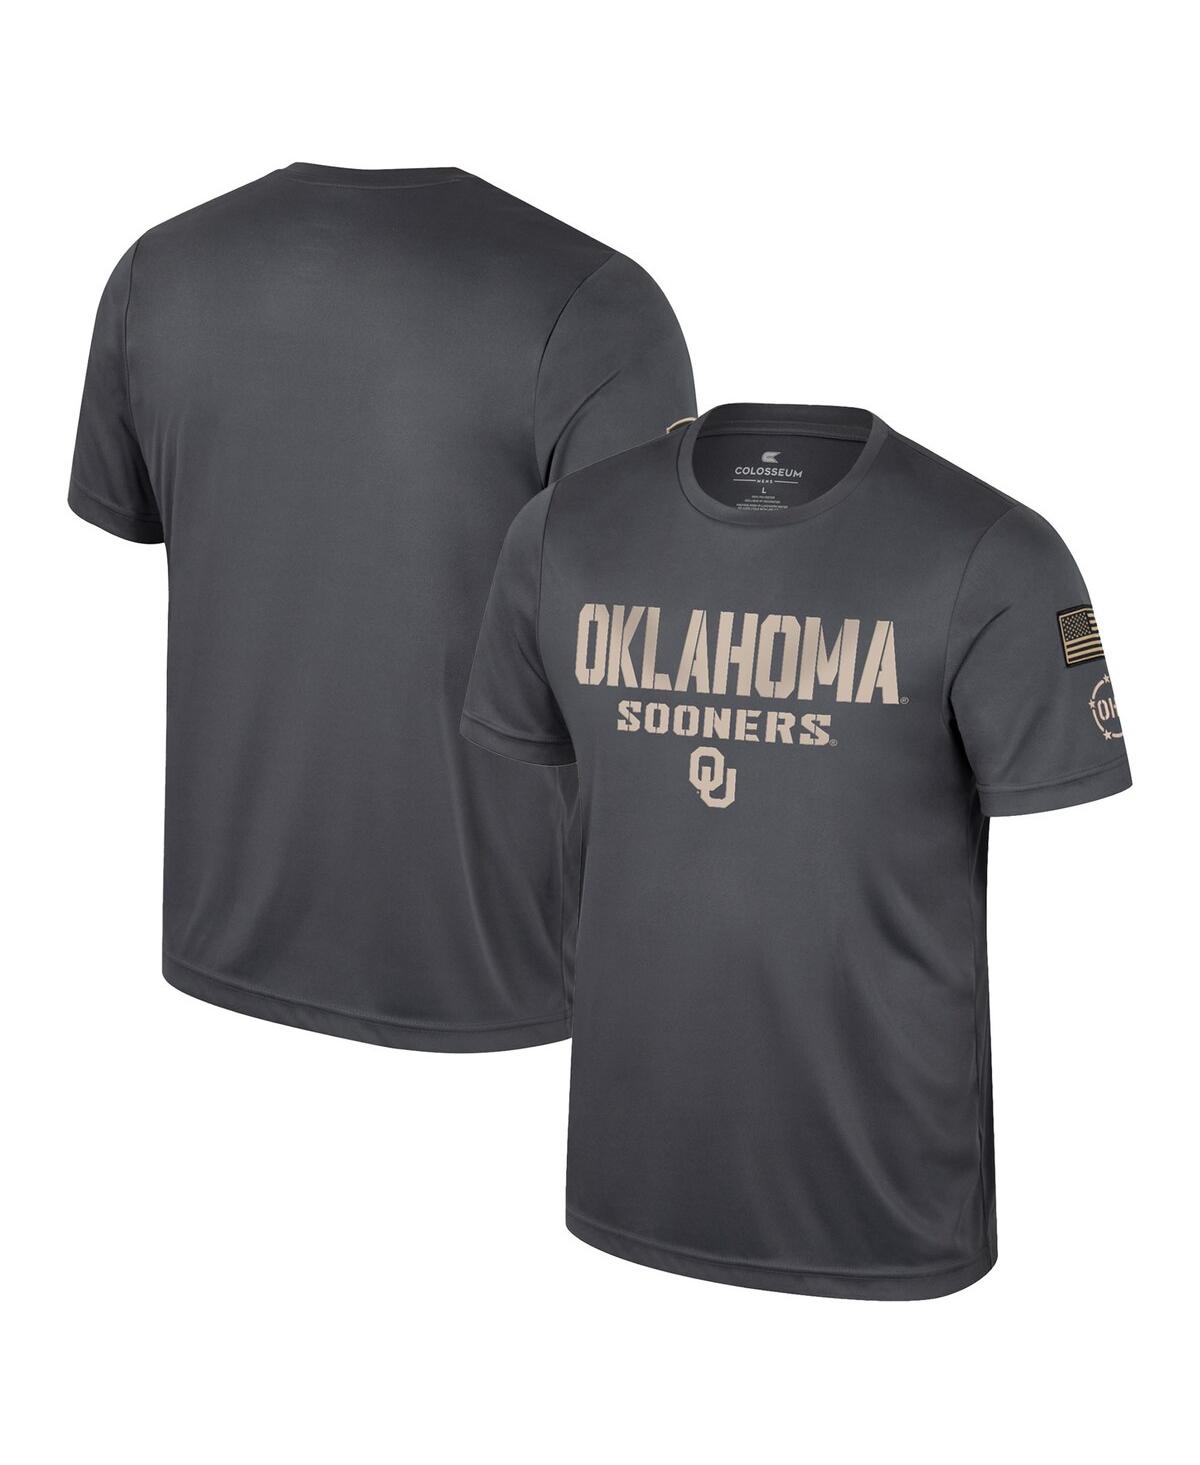 Colosseum Men's  Charcoal Oklahoma Sooners Oht Military-inspired Appreciation T-shirt